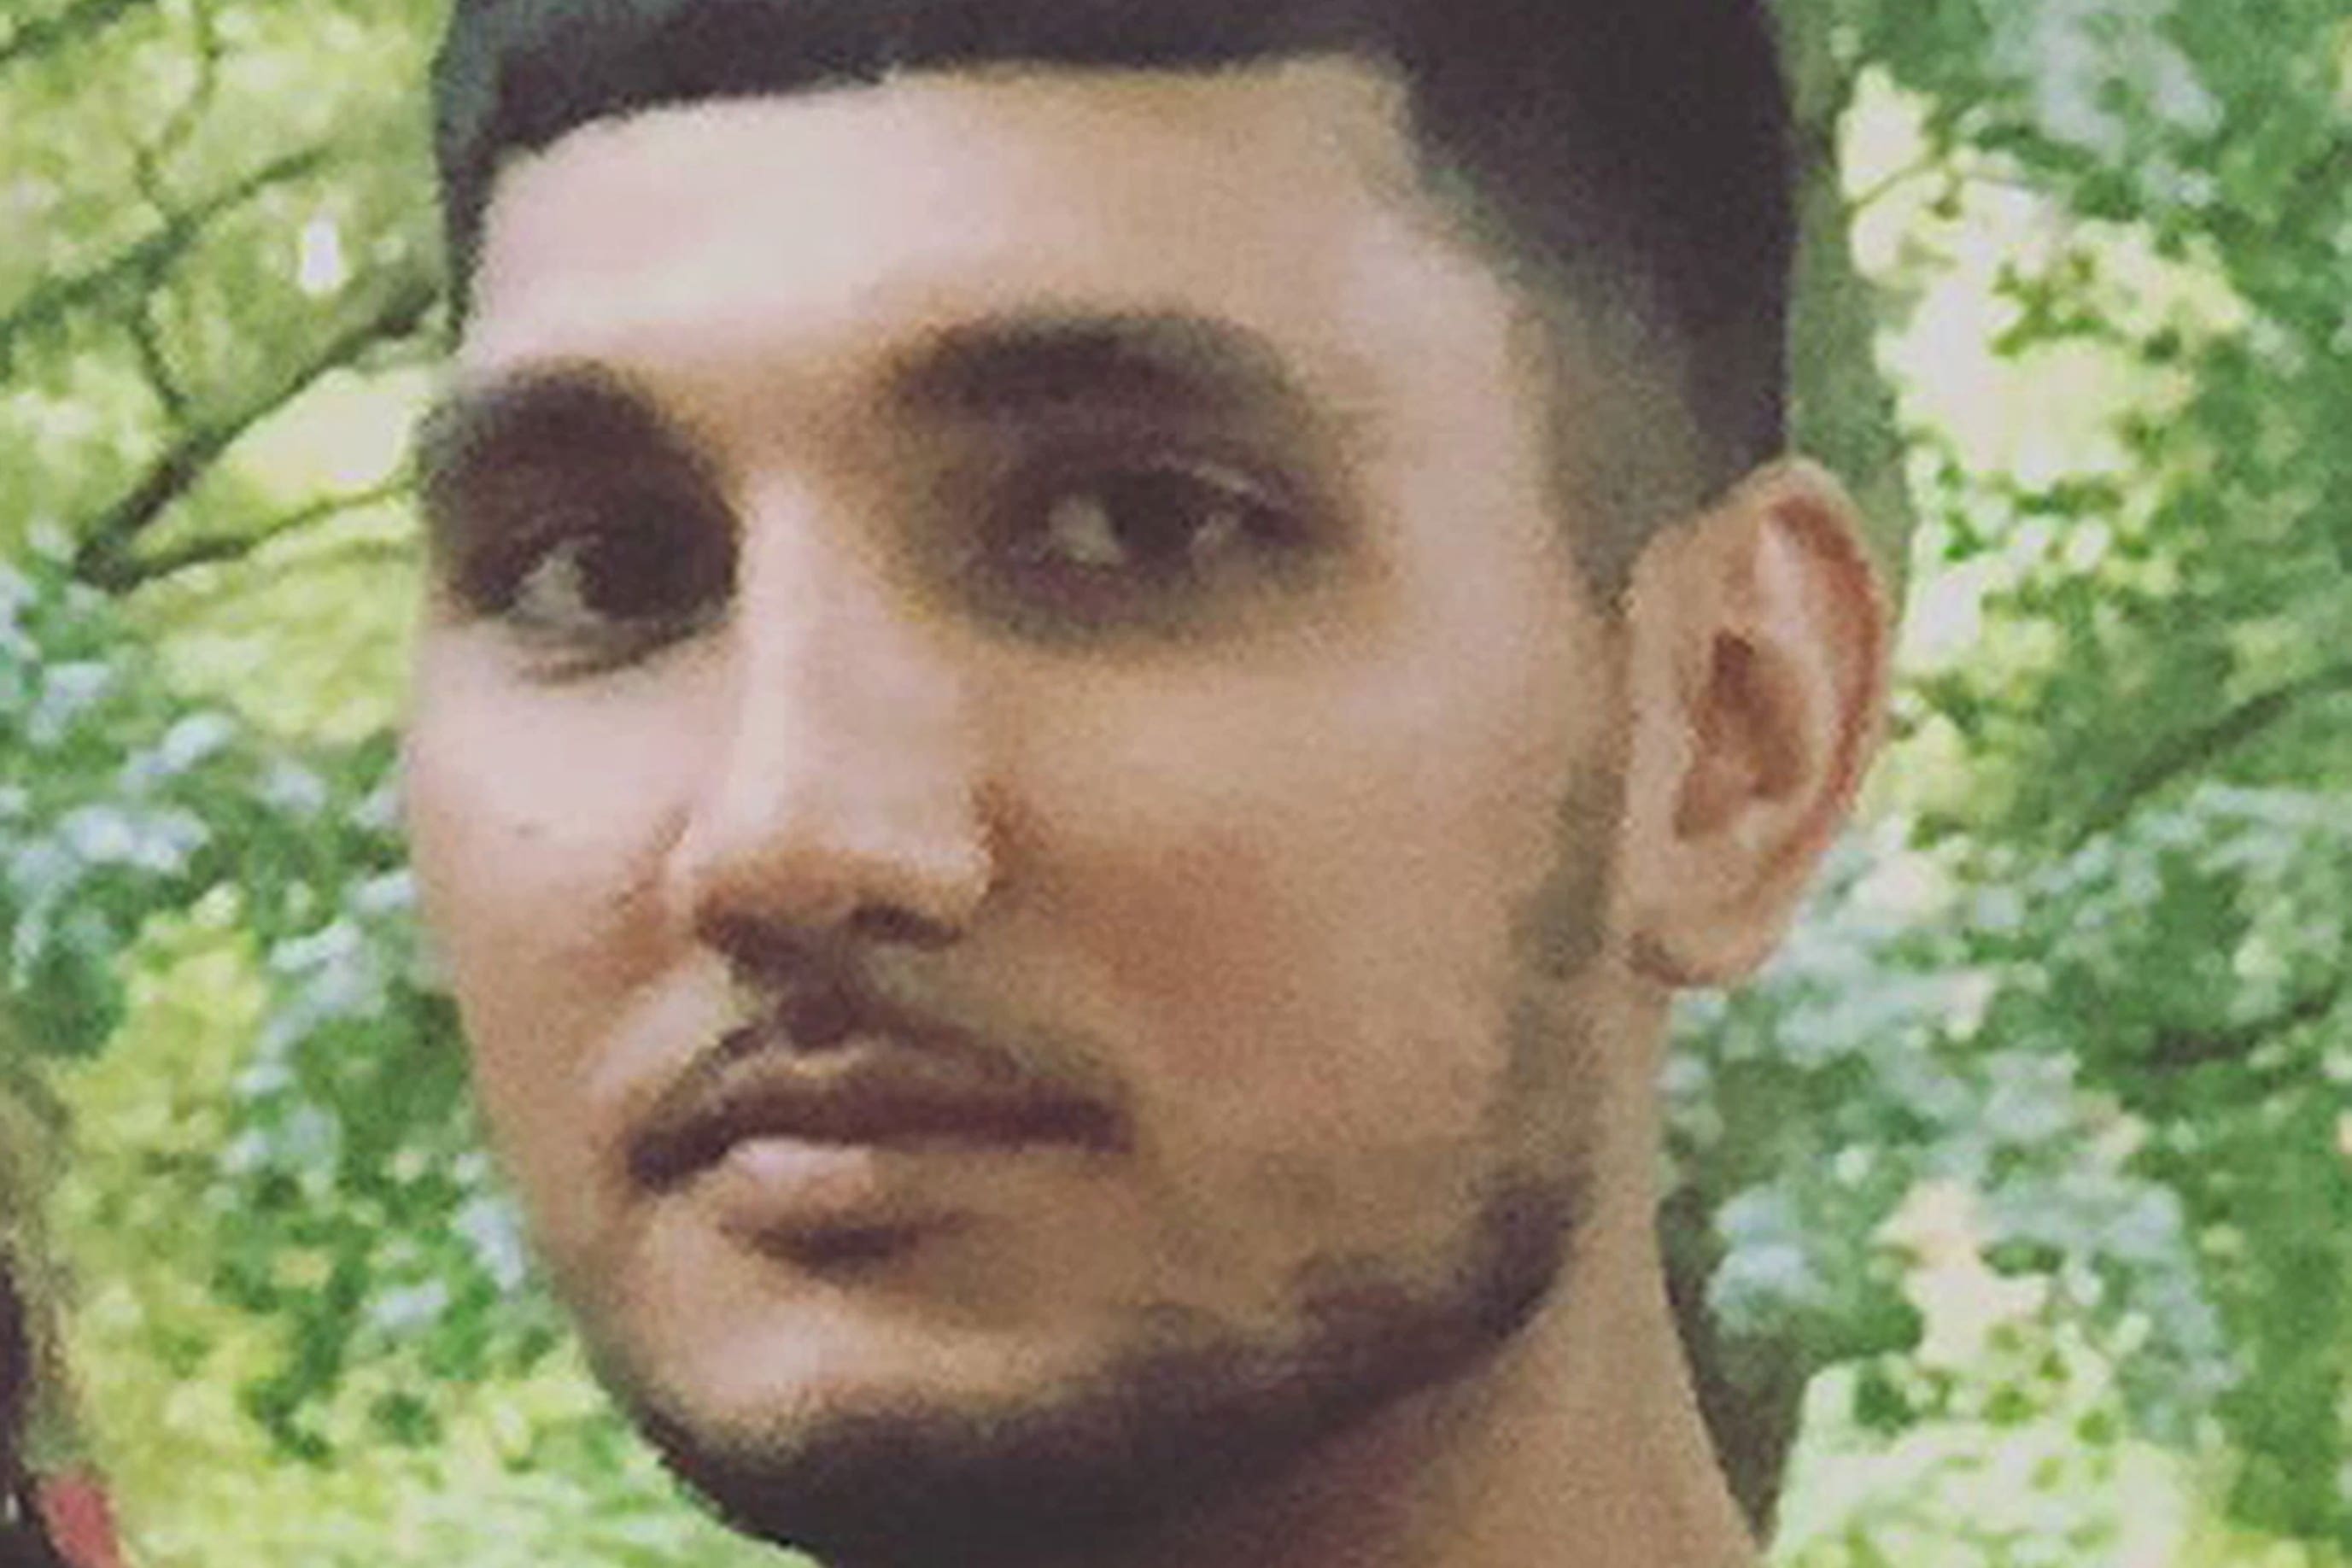 Mohammed Shah Subhani was ambushed at a premises in Hounslow, west London, in May 2019 (Family handout/PA)